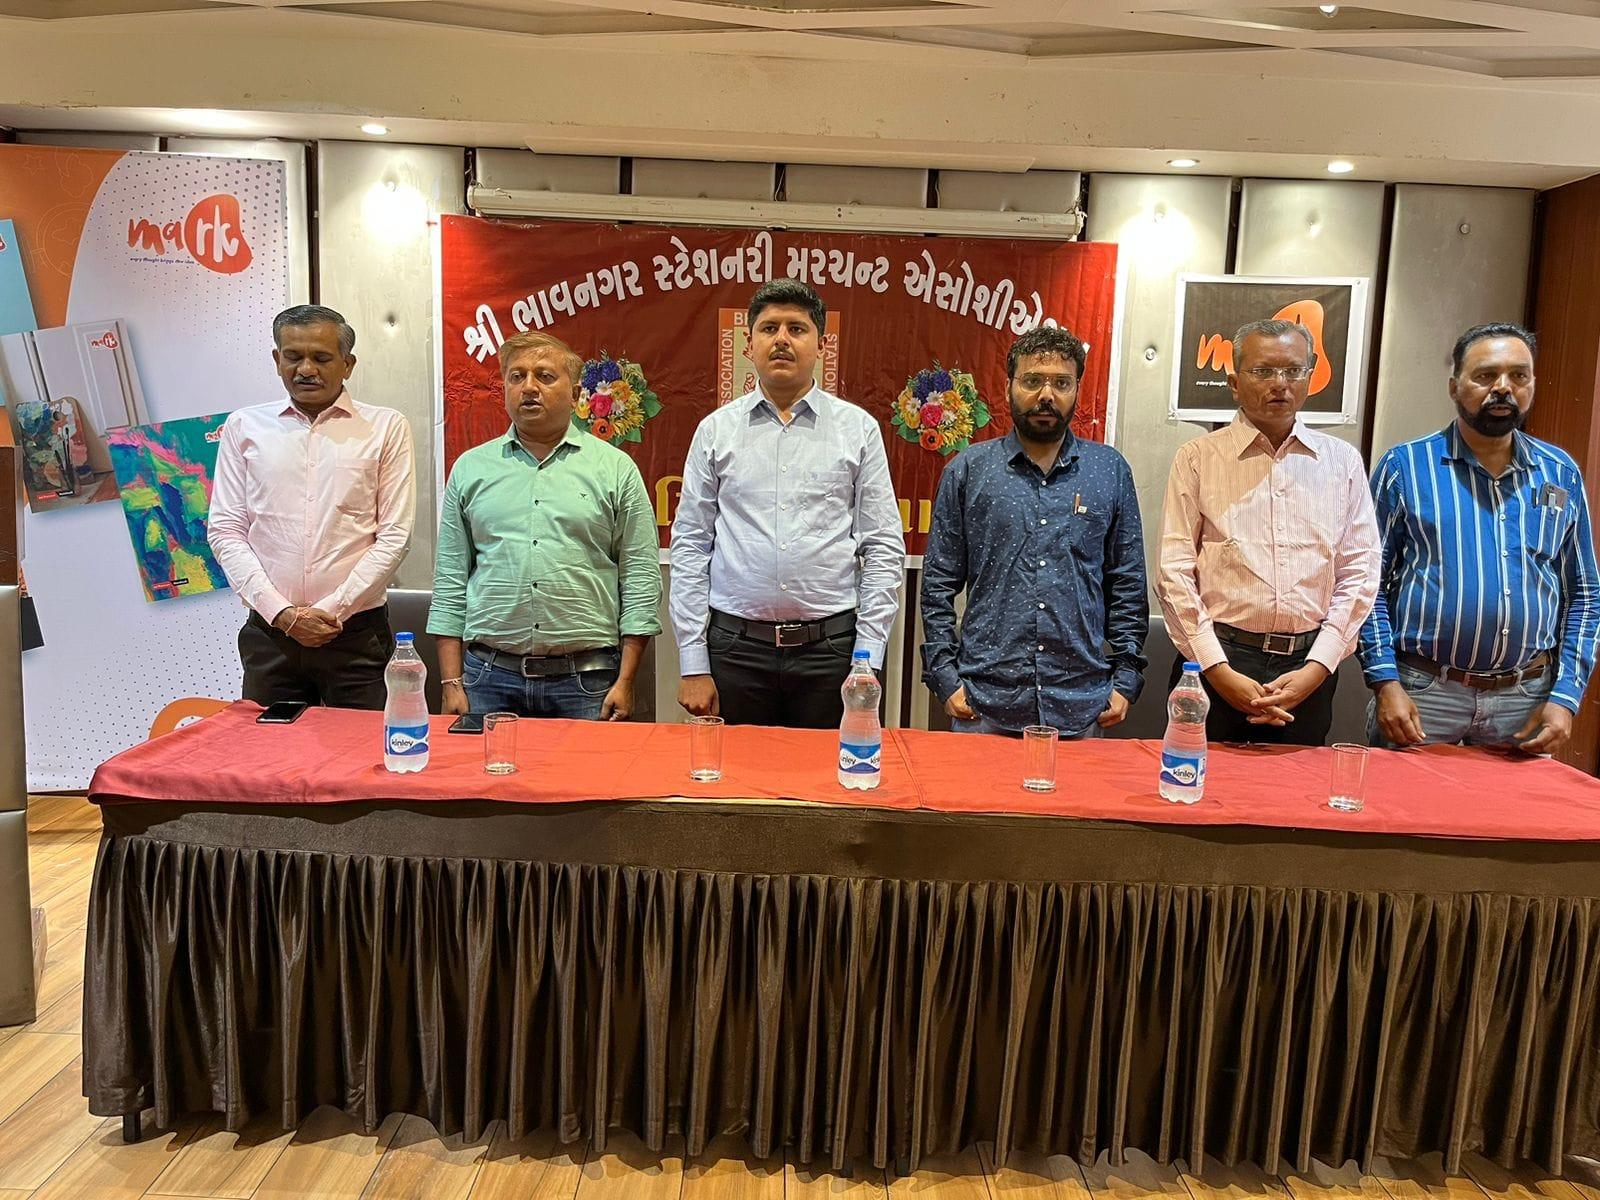 A get-together ceremony of the Stationery Merchant Association was held at Waghawadi Road, Bhavnagar city.